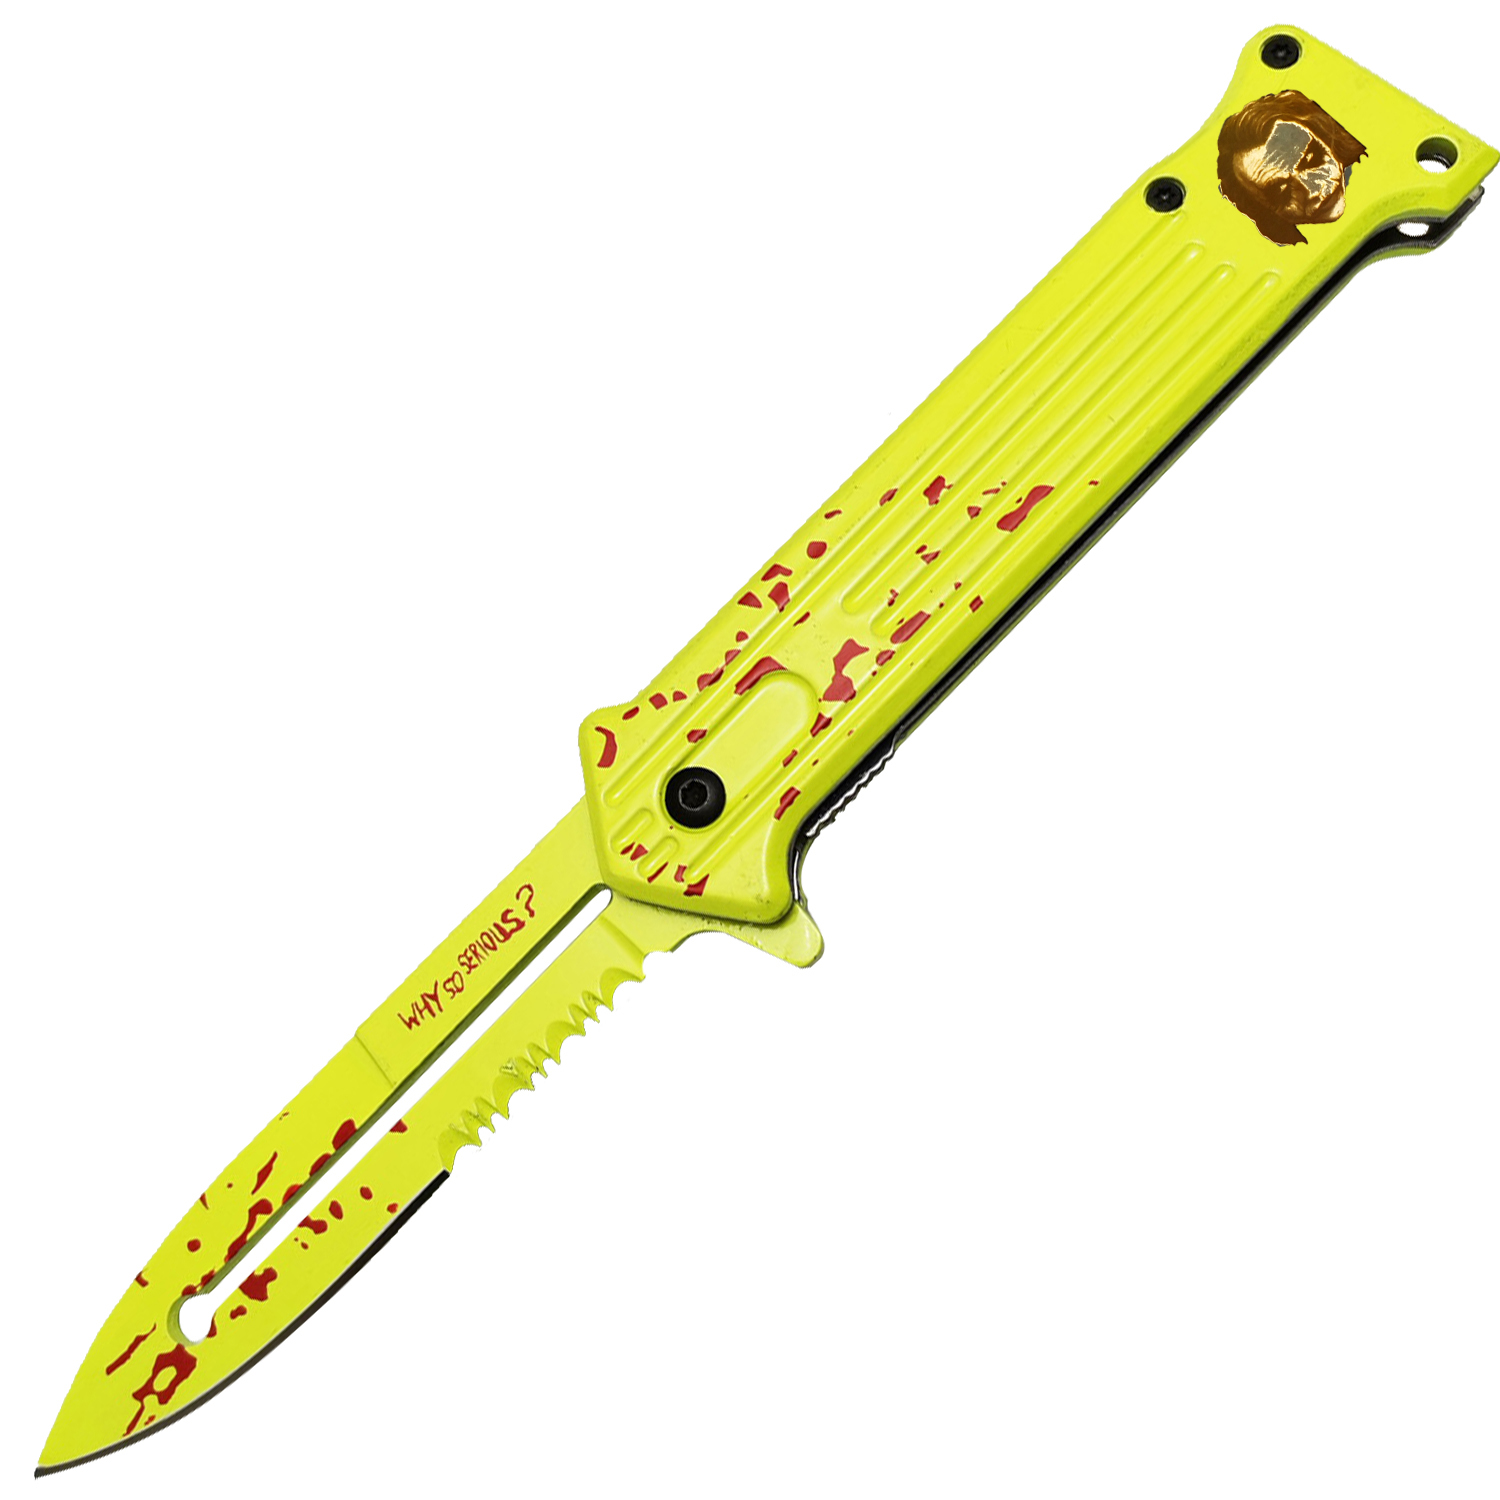 Harlequin of Hate Why So Serious Joker Folding Knife with Engraving